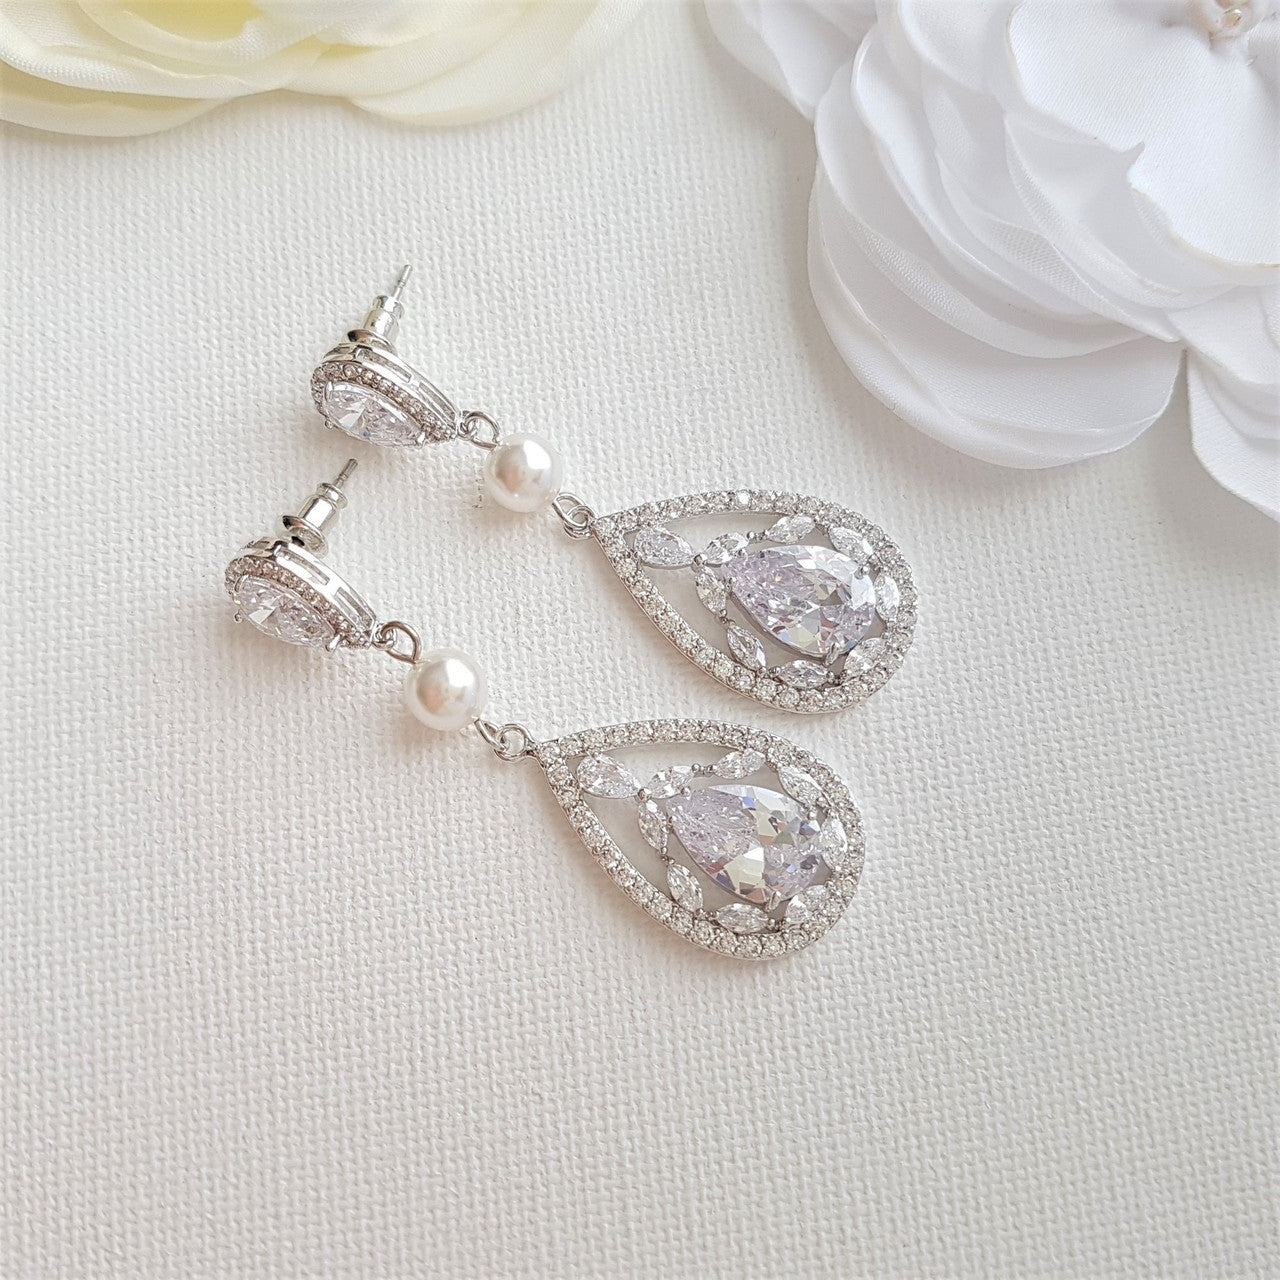 Rose Gold CZ Crystal Earrings for Weddings & Brides-Esther